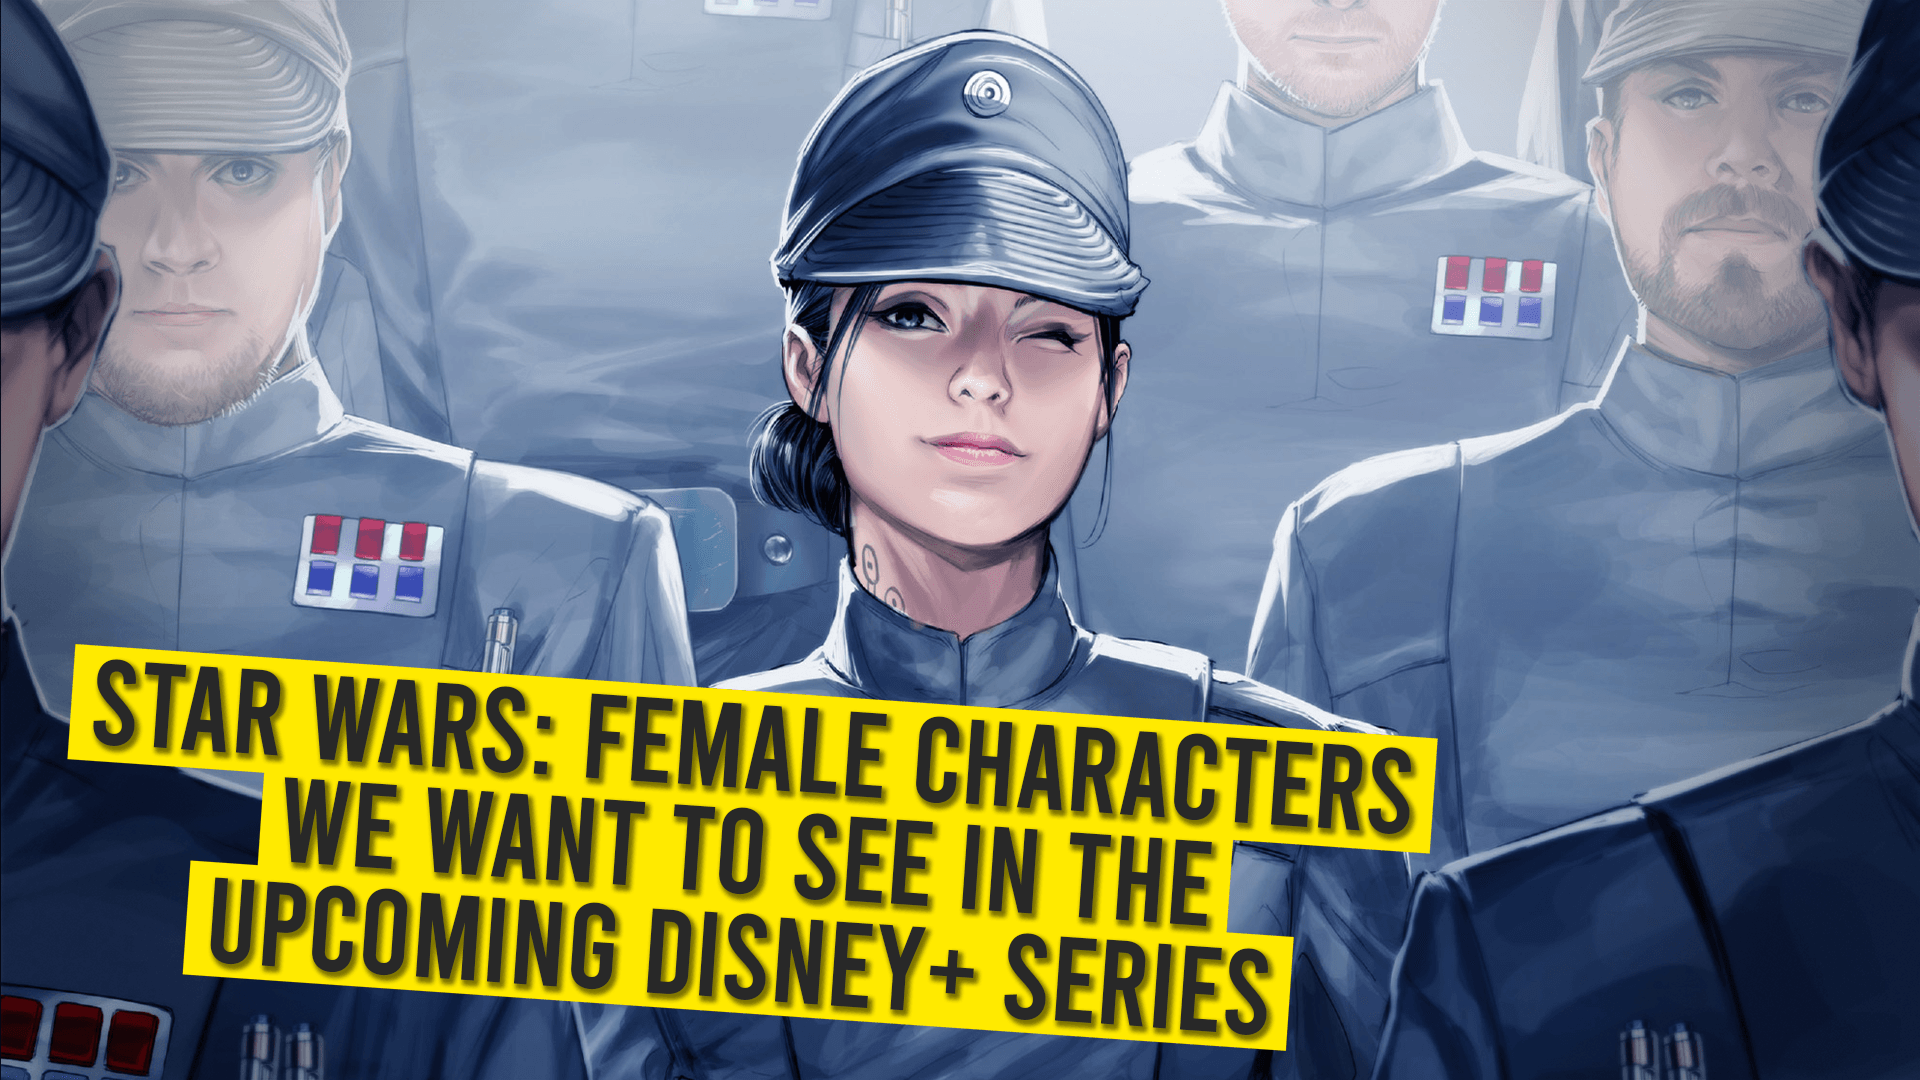 Star Wars: Female Characters We Want To See In The Upcoming Disney+ Series